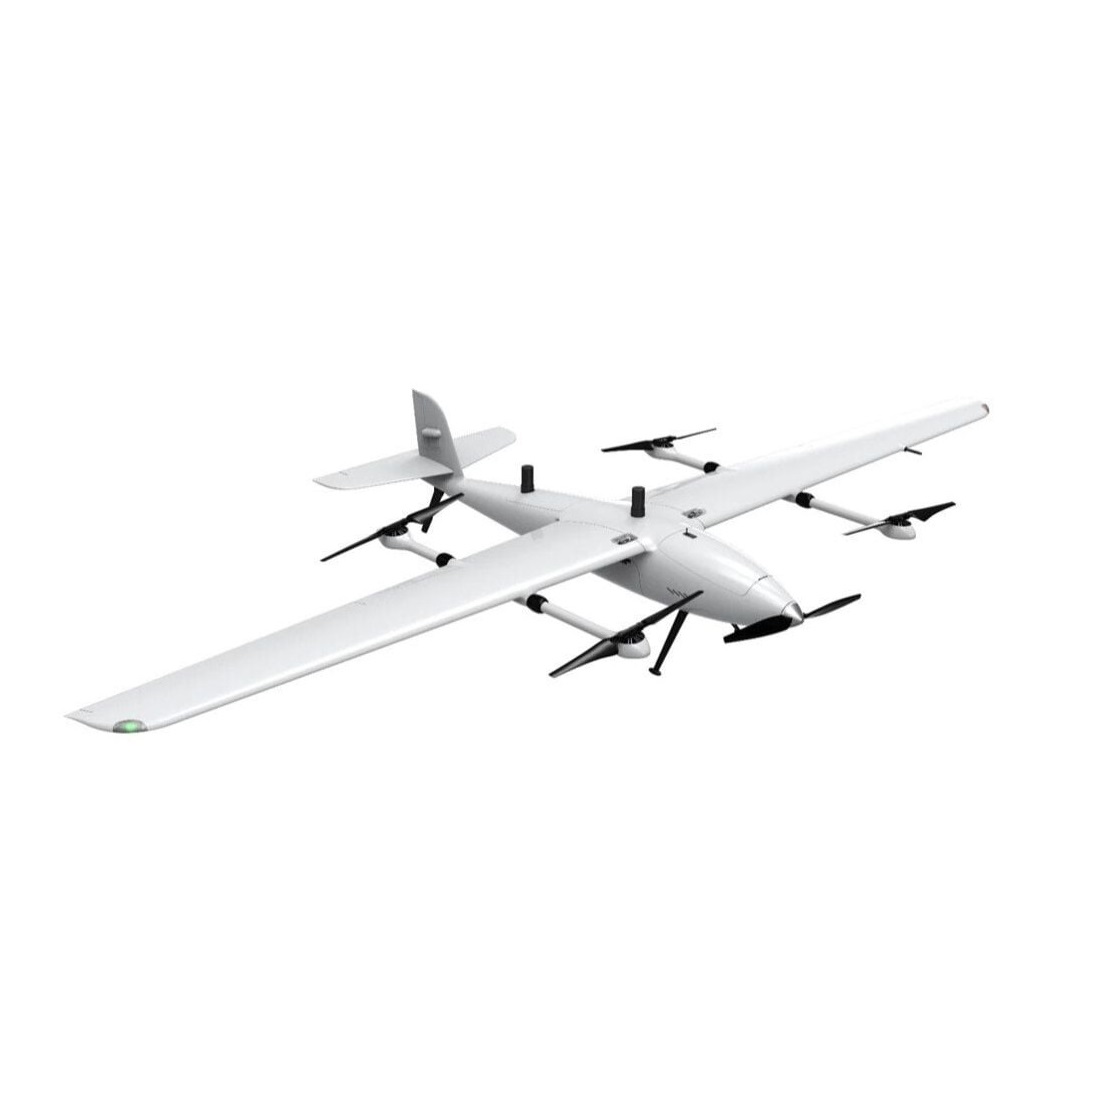 G7-vtol-fixed-wing-uav-drone-for-survey-and-rescue-with-power-set-version